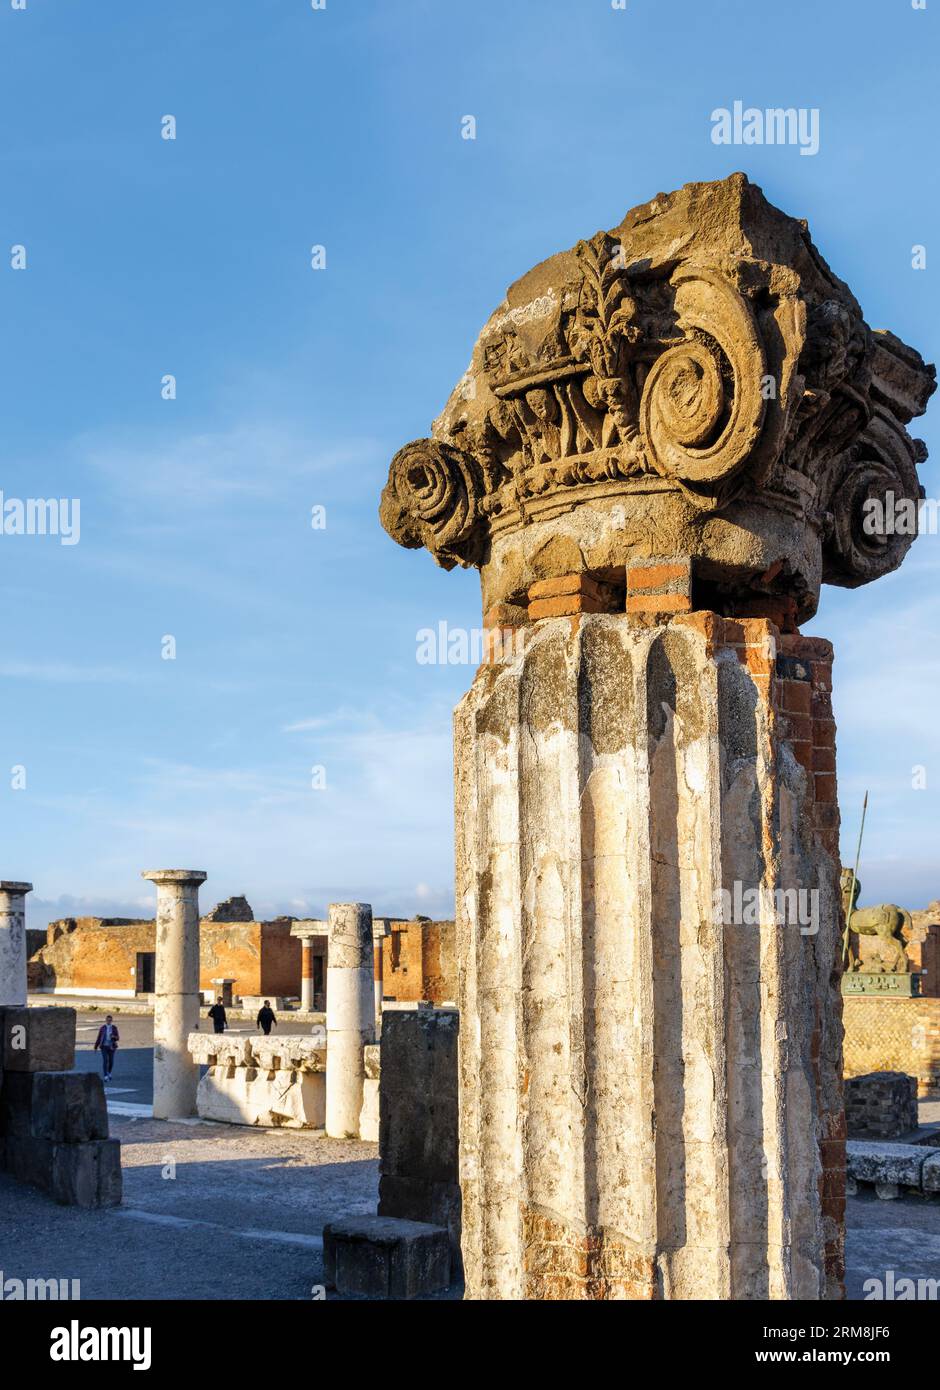 Pompeii Archaeological Site, Campania, Italy.  Capital of column in the Basilica.  The form is known as Pompeian Ionic and appears to be a mix of the Stock Photo